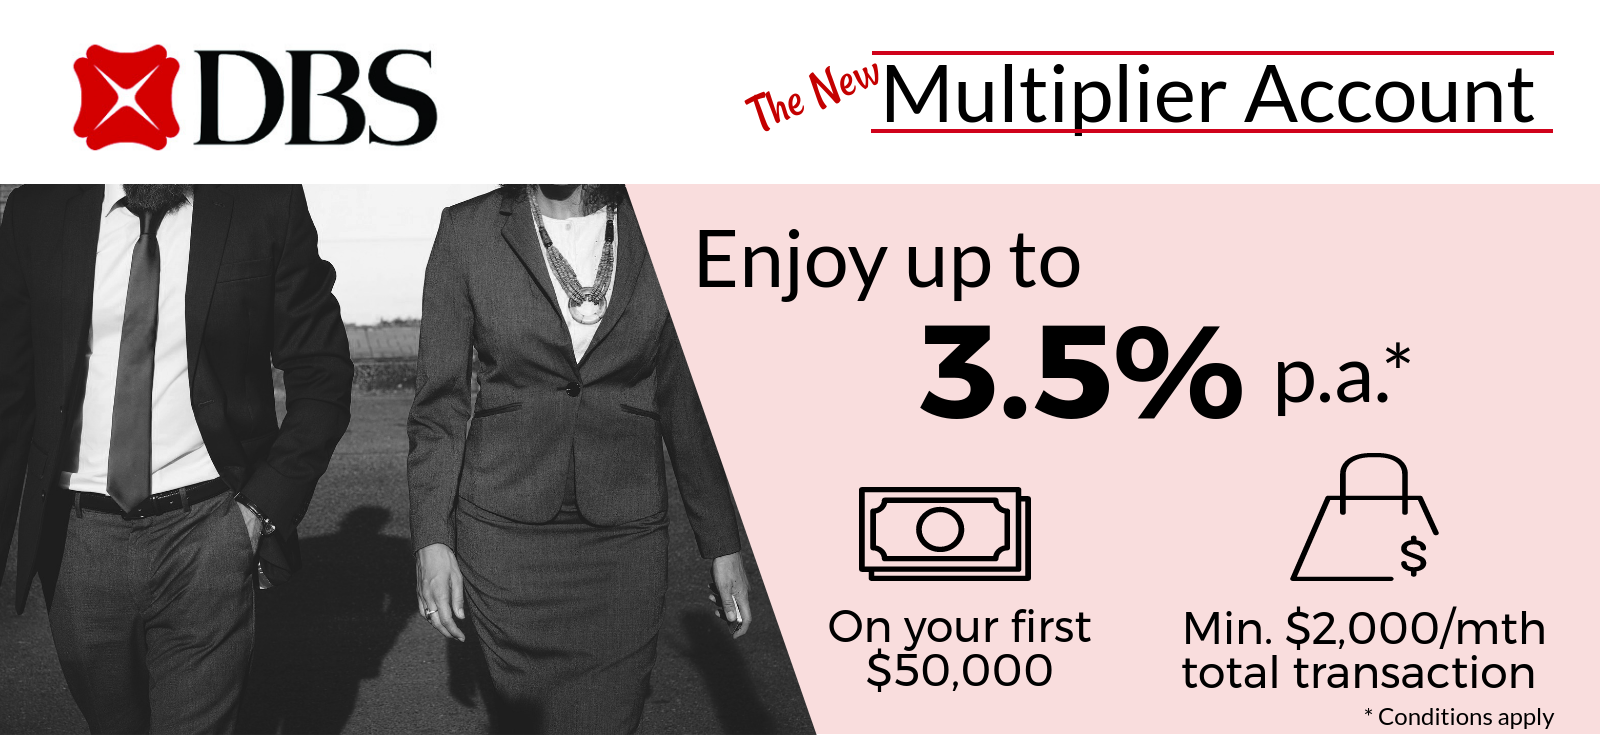 The New DBS Multiplier Account: The Best Savings Account For Frugal Millennials